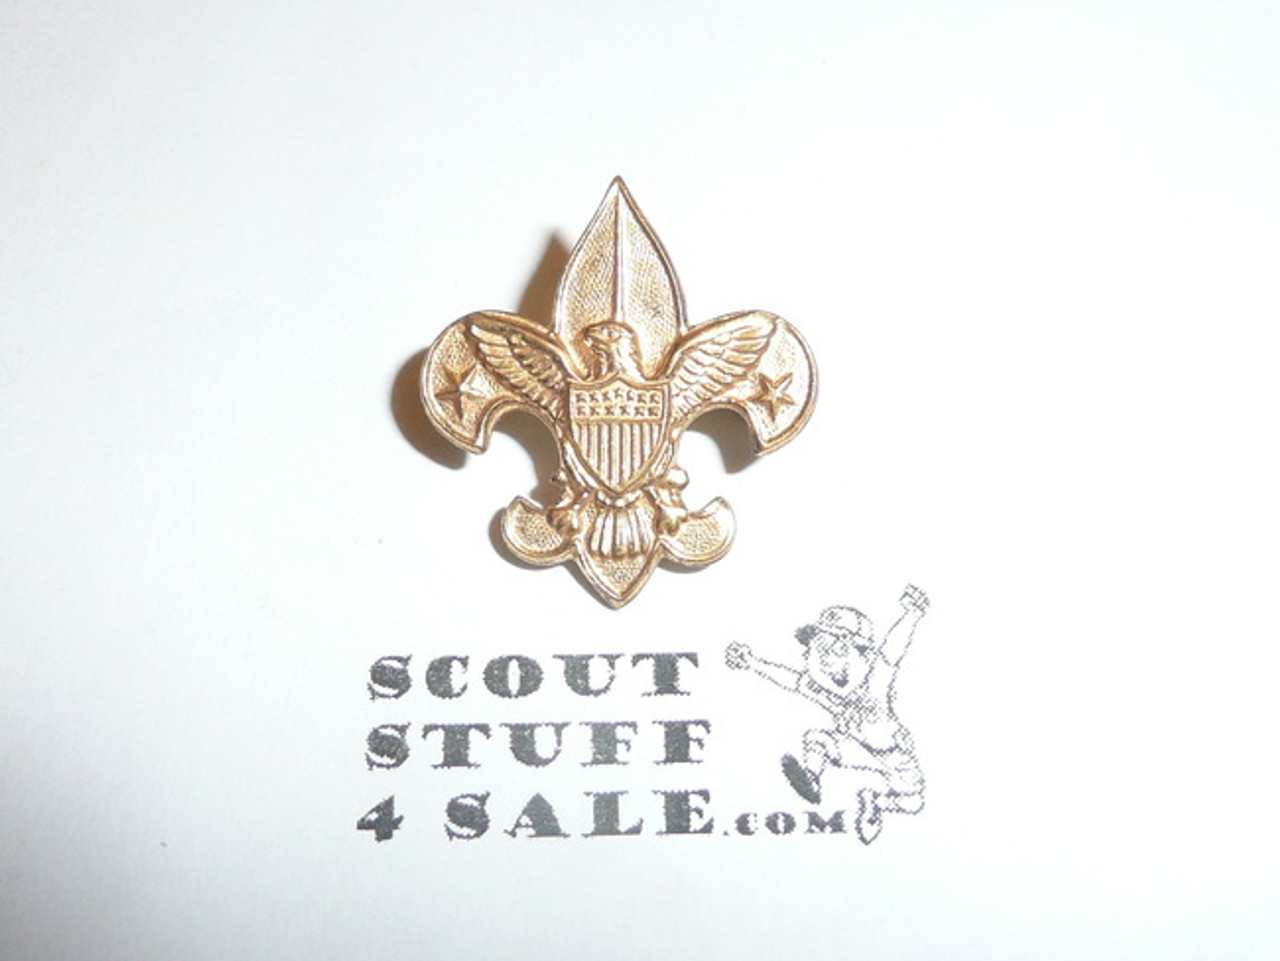 Tenderfoot Scout Rank Pin (Could be used as Generic Scouting Collar Pin), Spin Lock Clasp, 21mm Wide, Pat. 1911 back markings, clasp broken